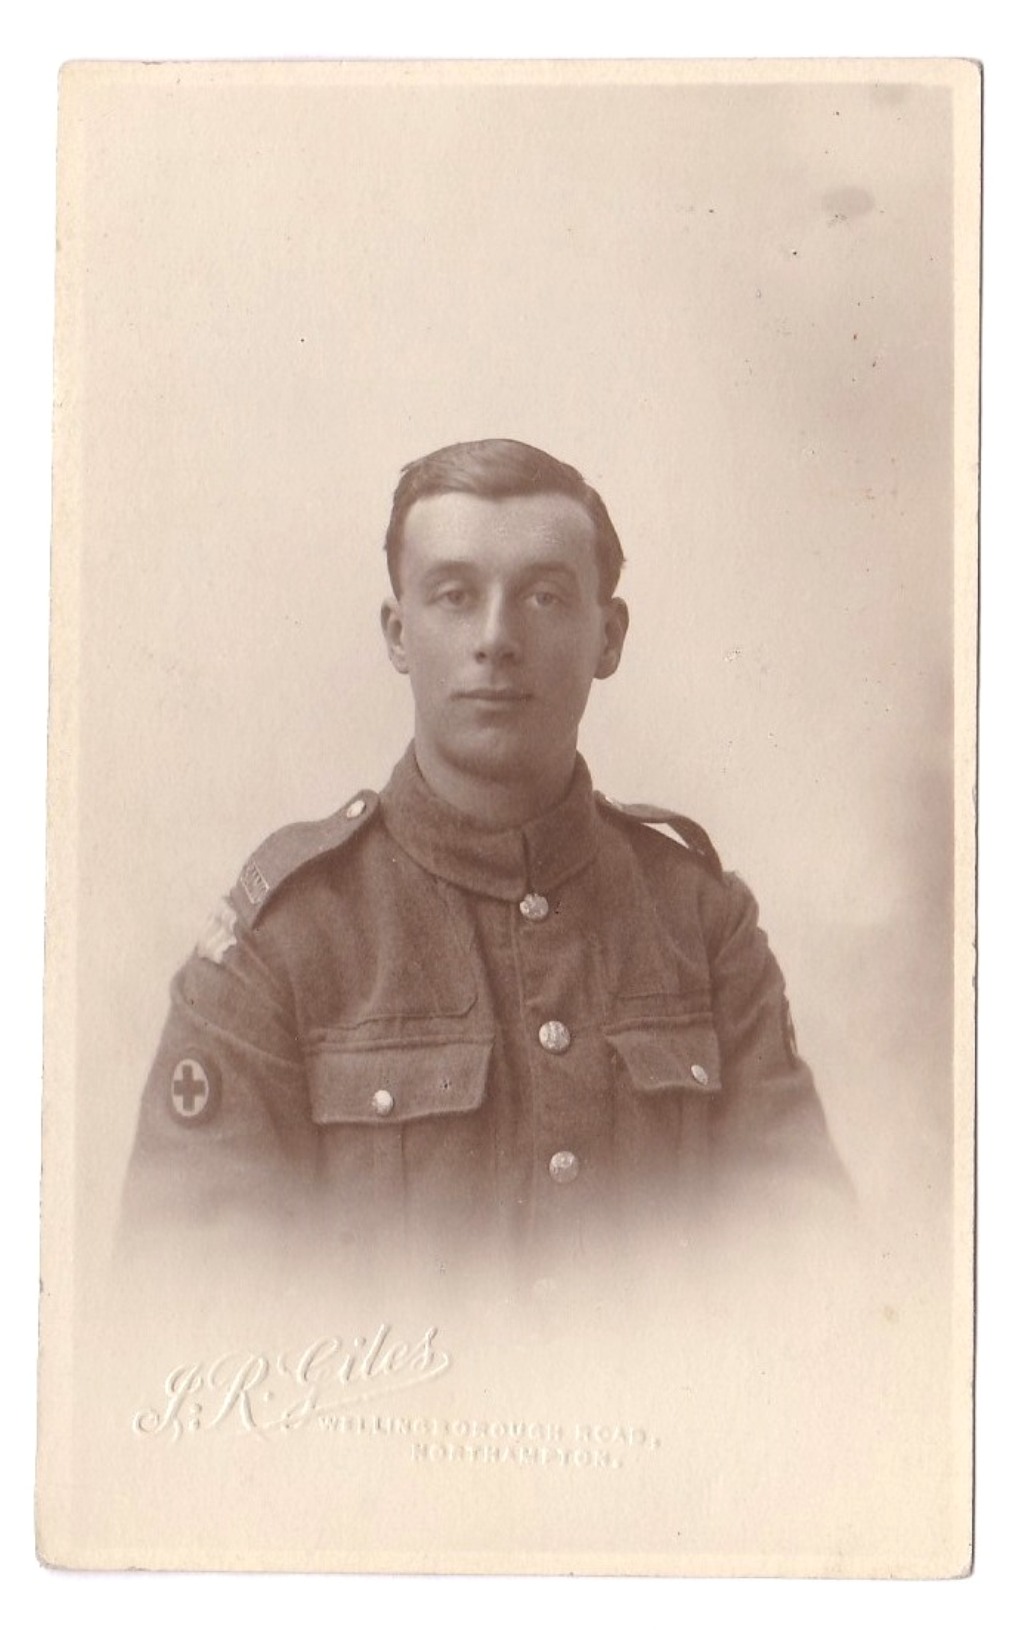 Royal Army Medical Corps WWI RP Private, photo Giles, Northampton